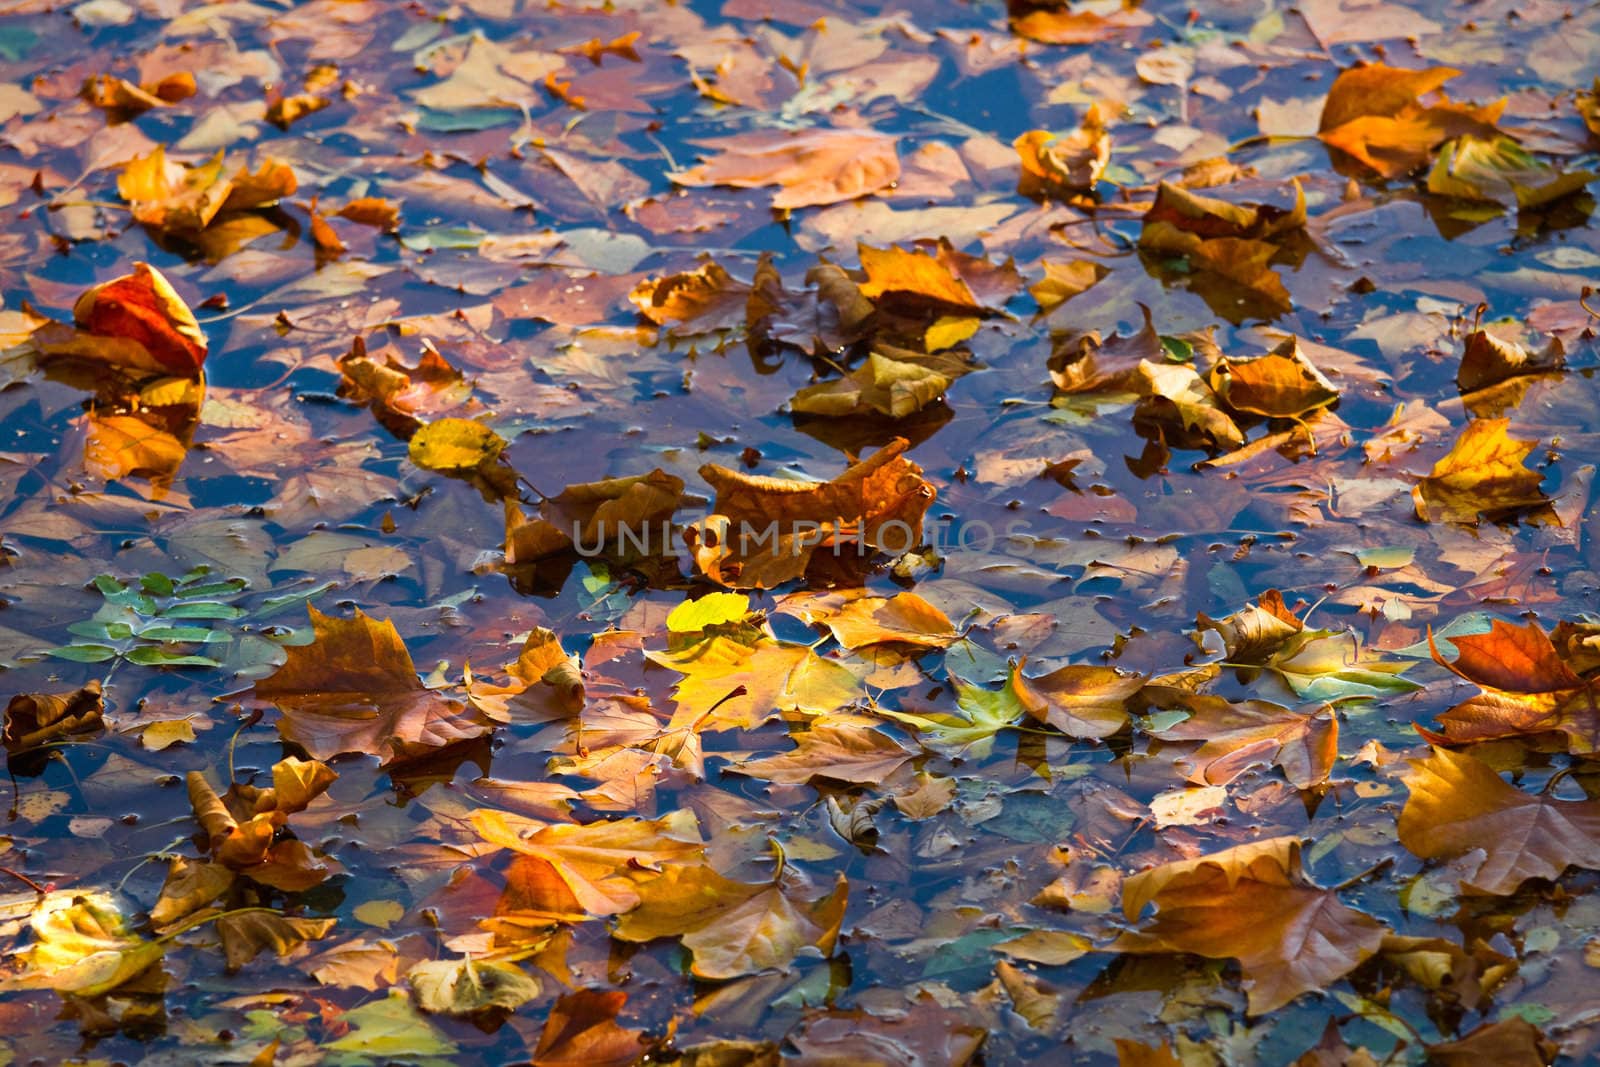 Autumn leaves floating in water by Colette